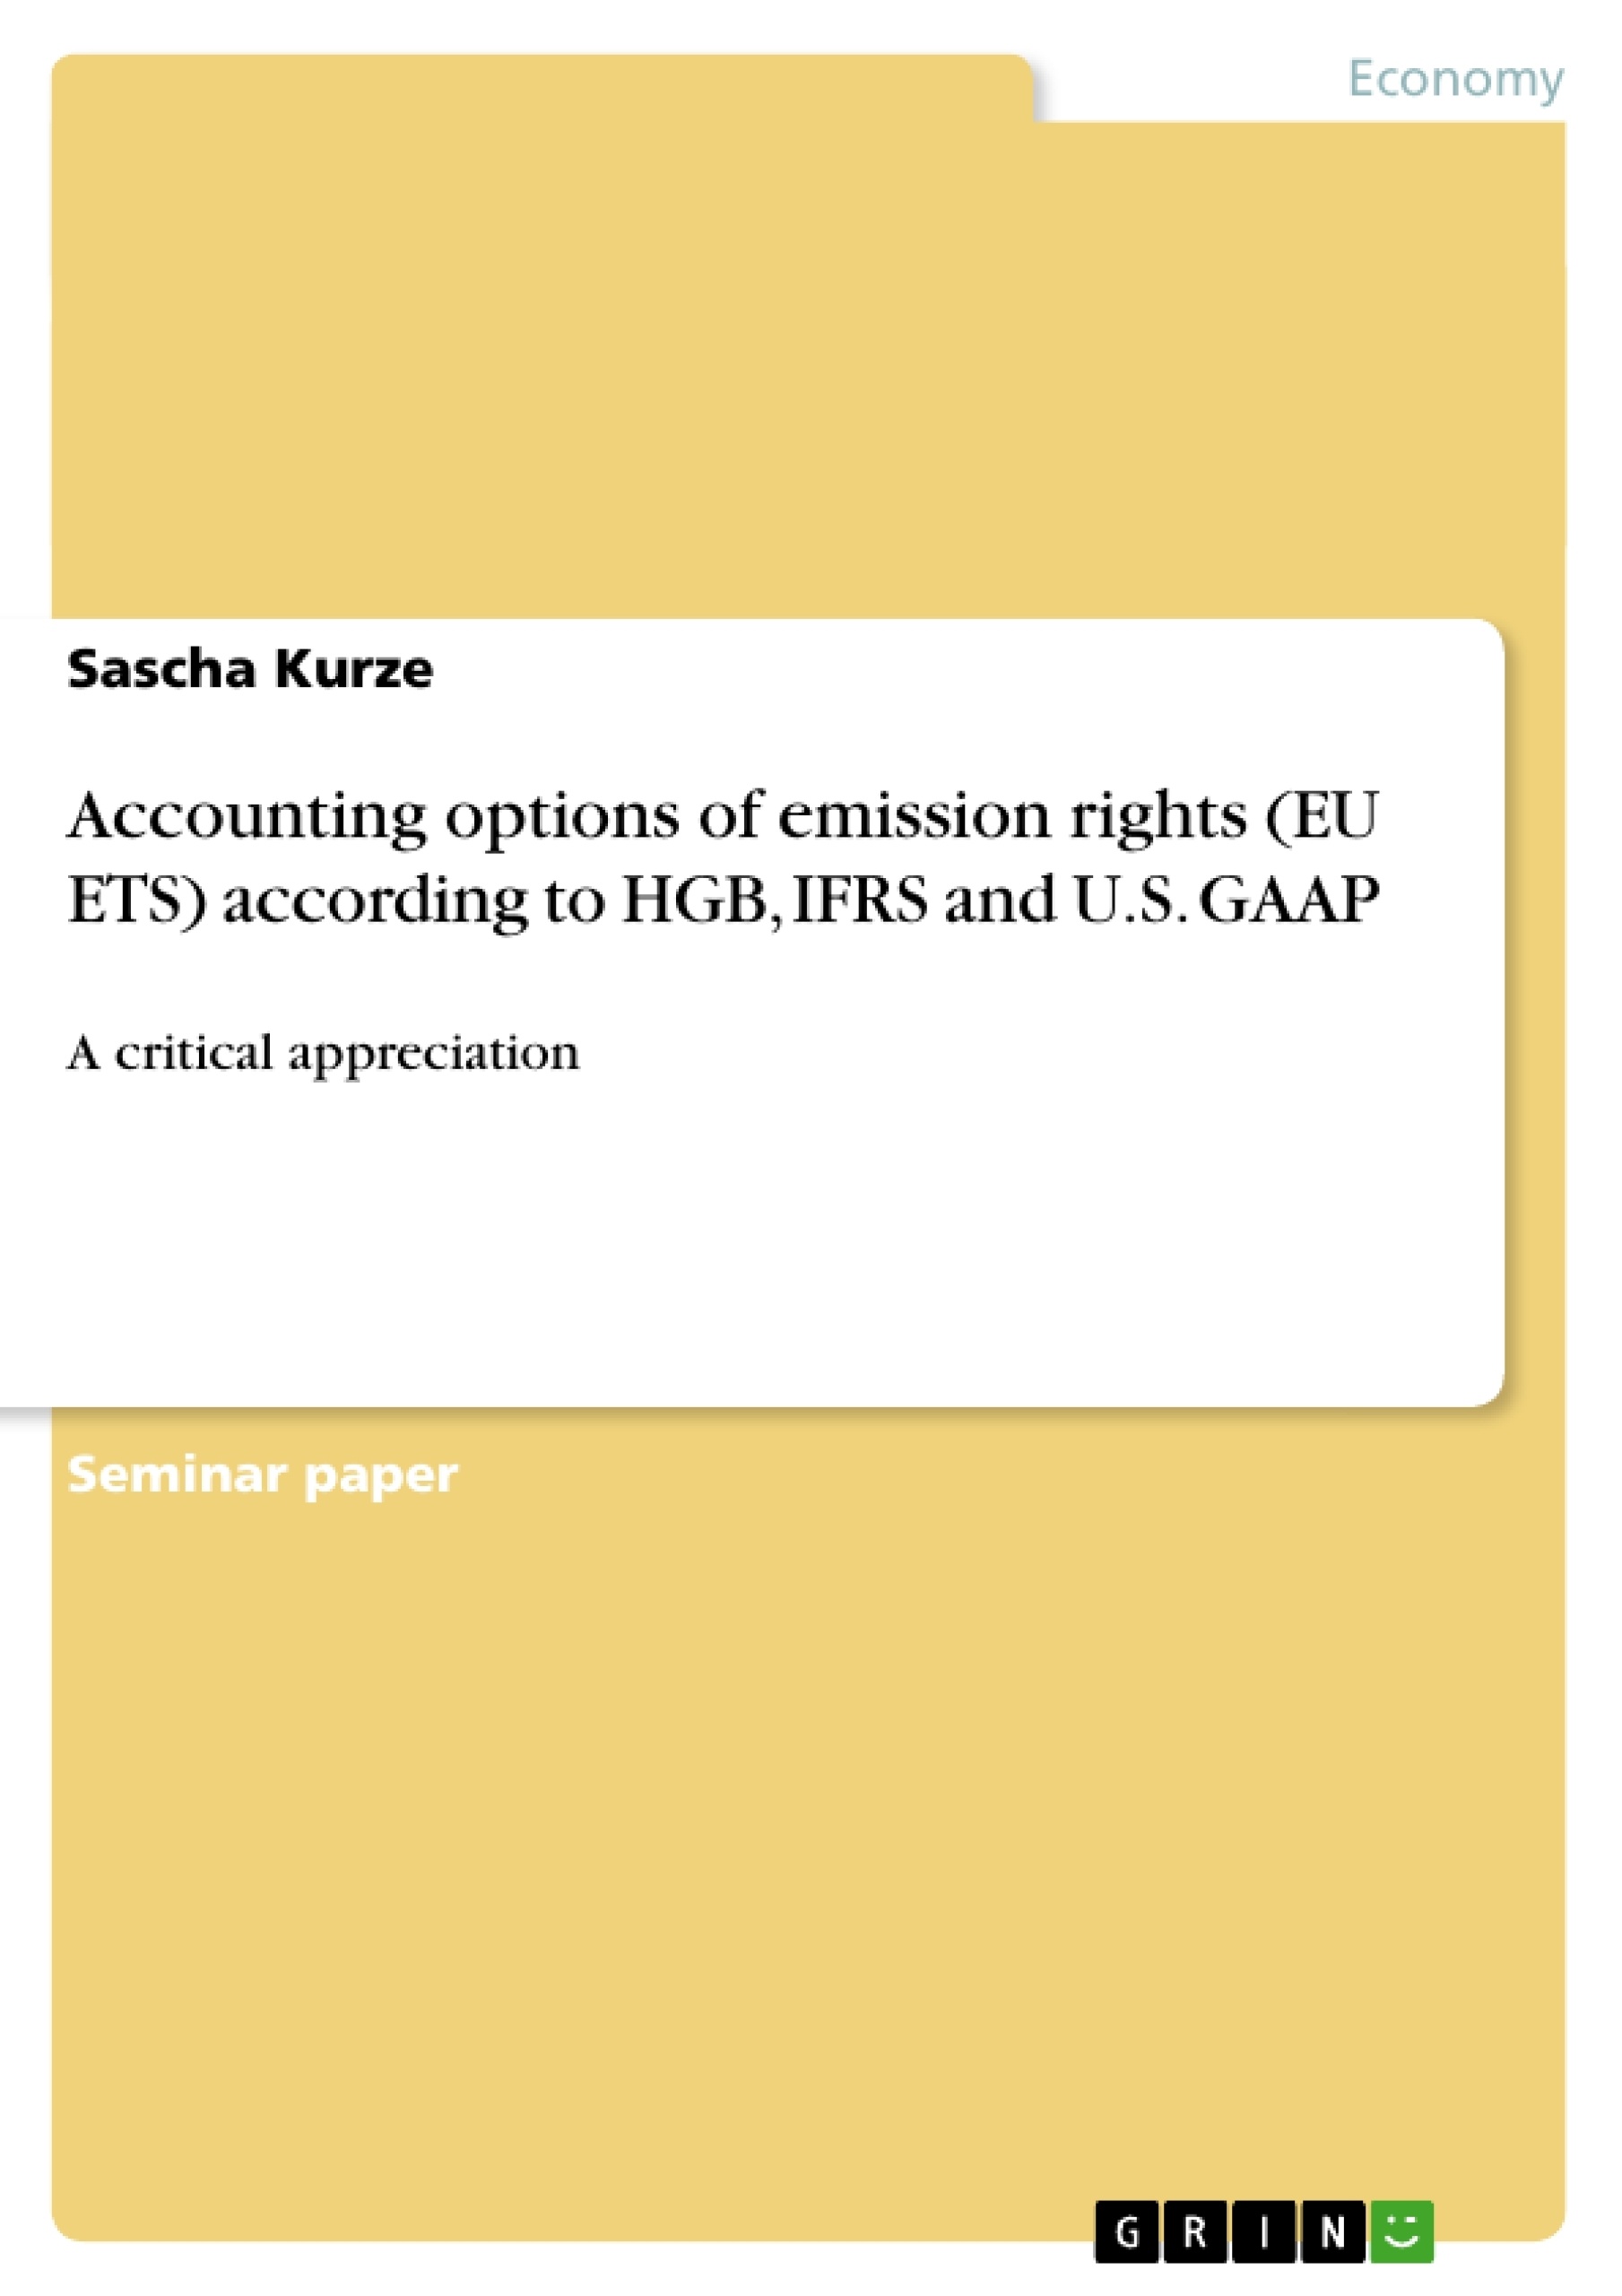 Title: Accounting options of emission rights (EU ETS) according to HGB, IFRS and U.S. GAAP